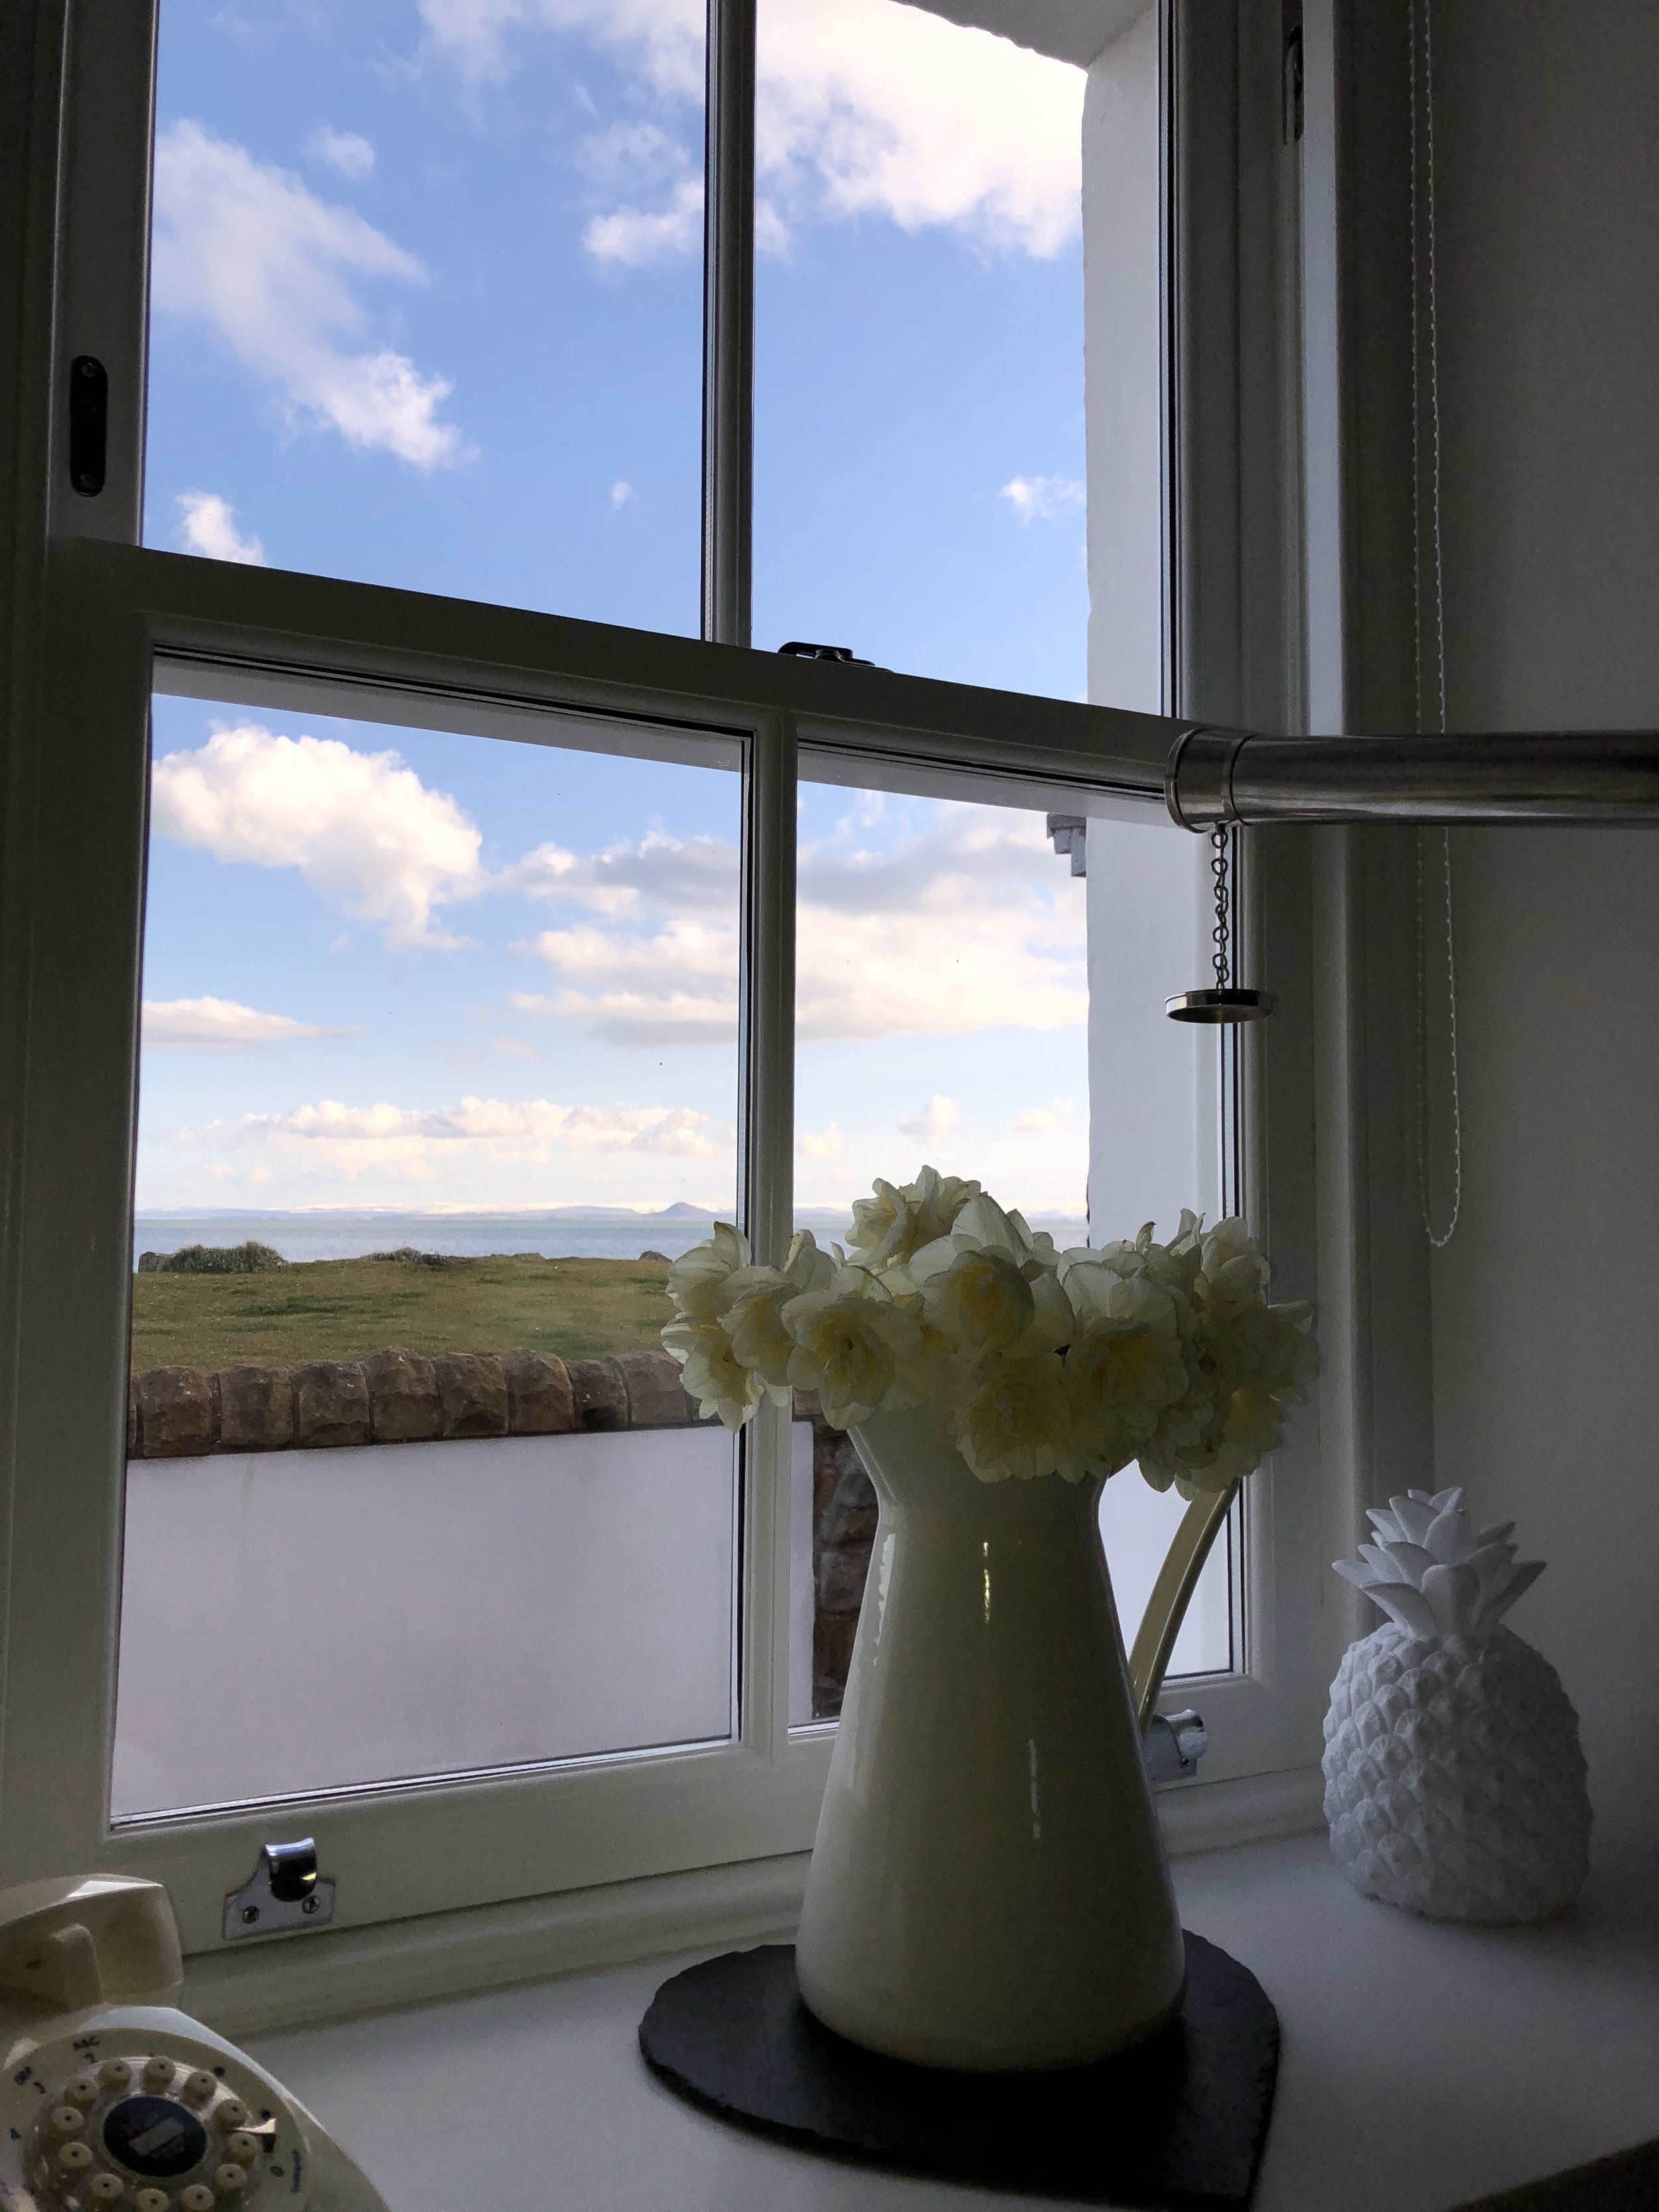 LIVING ROOM VIEW WITH DAFFS.jpg